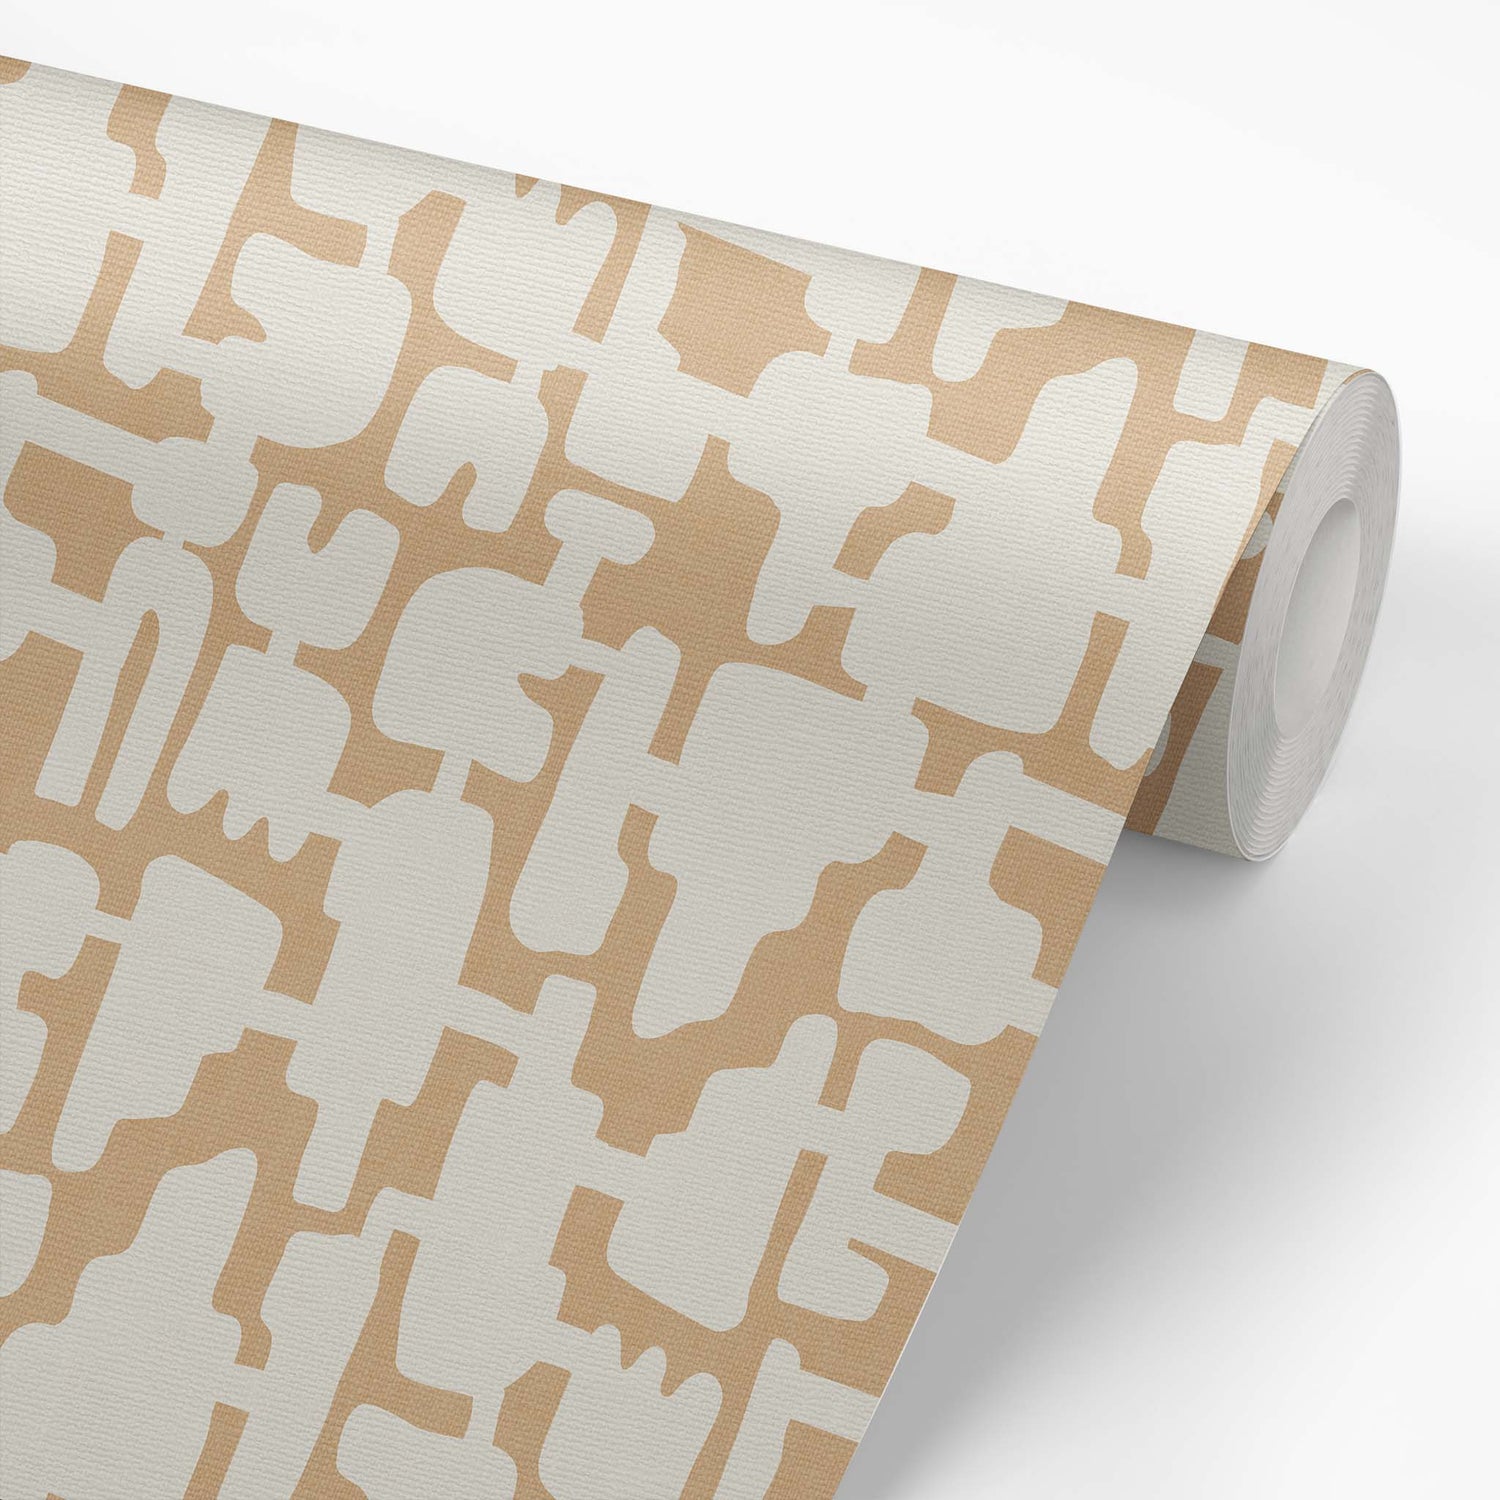 Wallpaper roll preview of Abstract Shapes Peel and Stick Wallpaper in Beige and Cream.